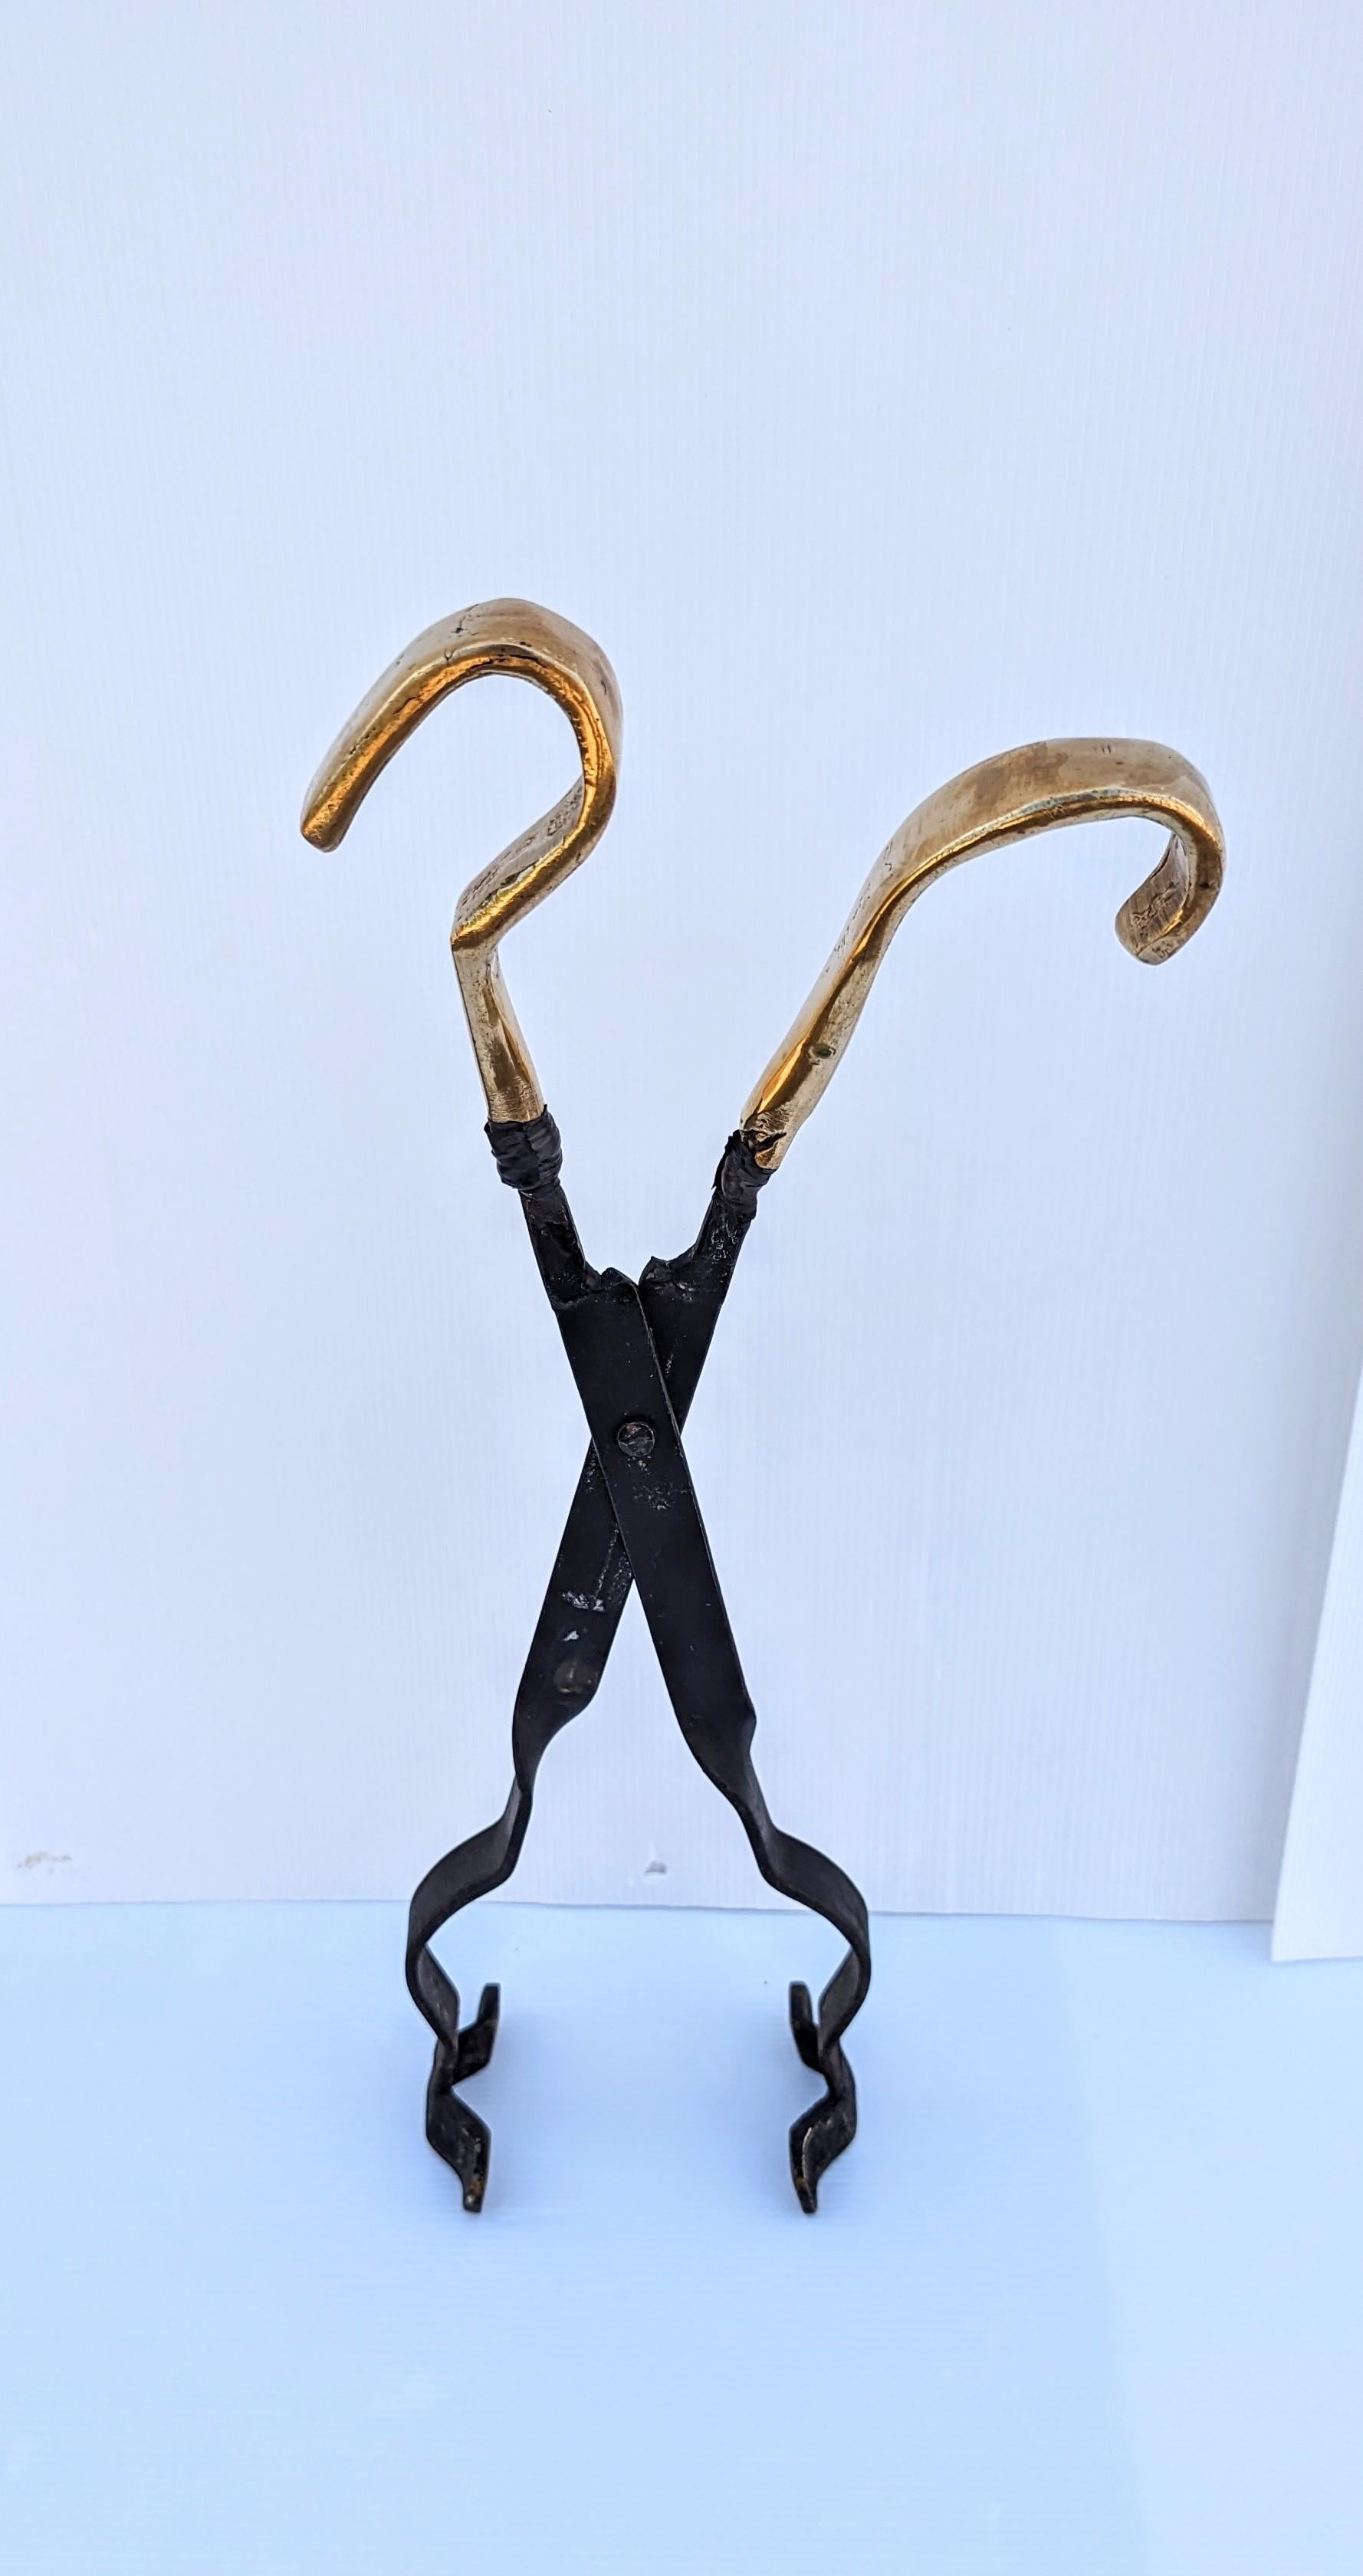 David Marshall Set of Brutalist Fireplace Tools and Firewood Holder, Spain 1970s For Sale 10